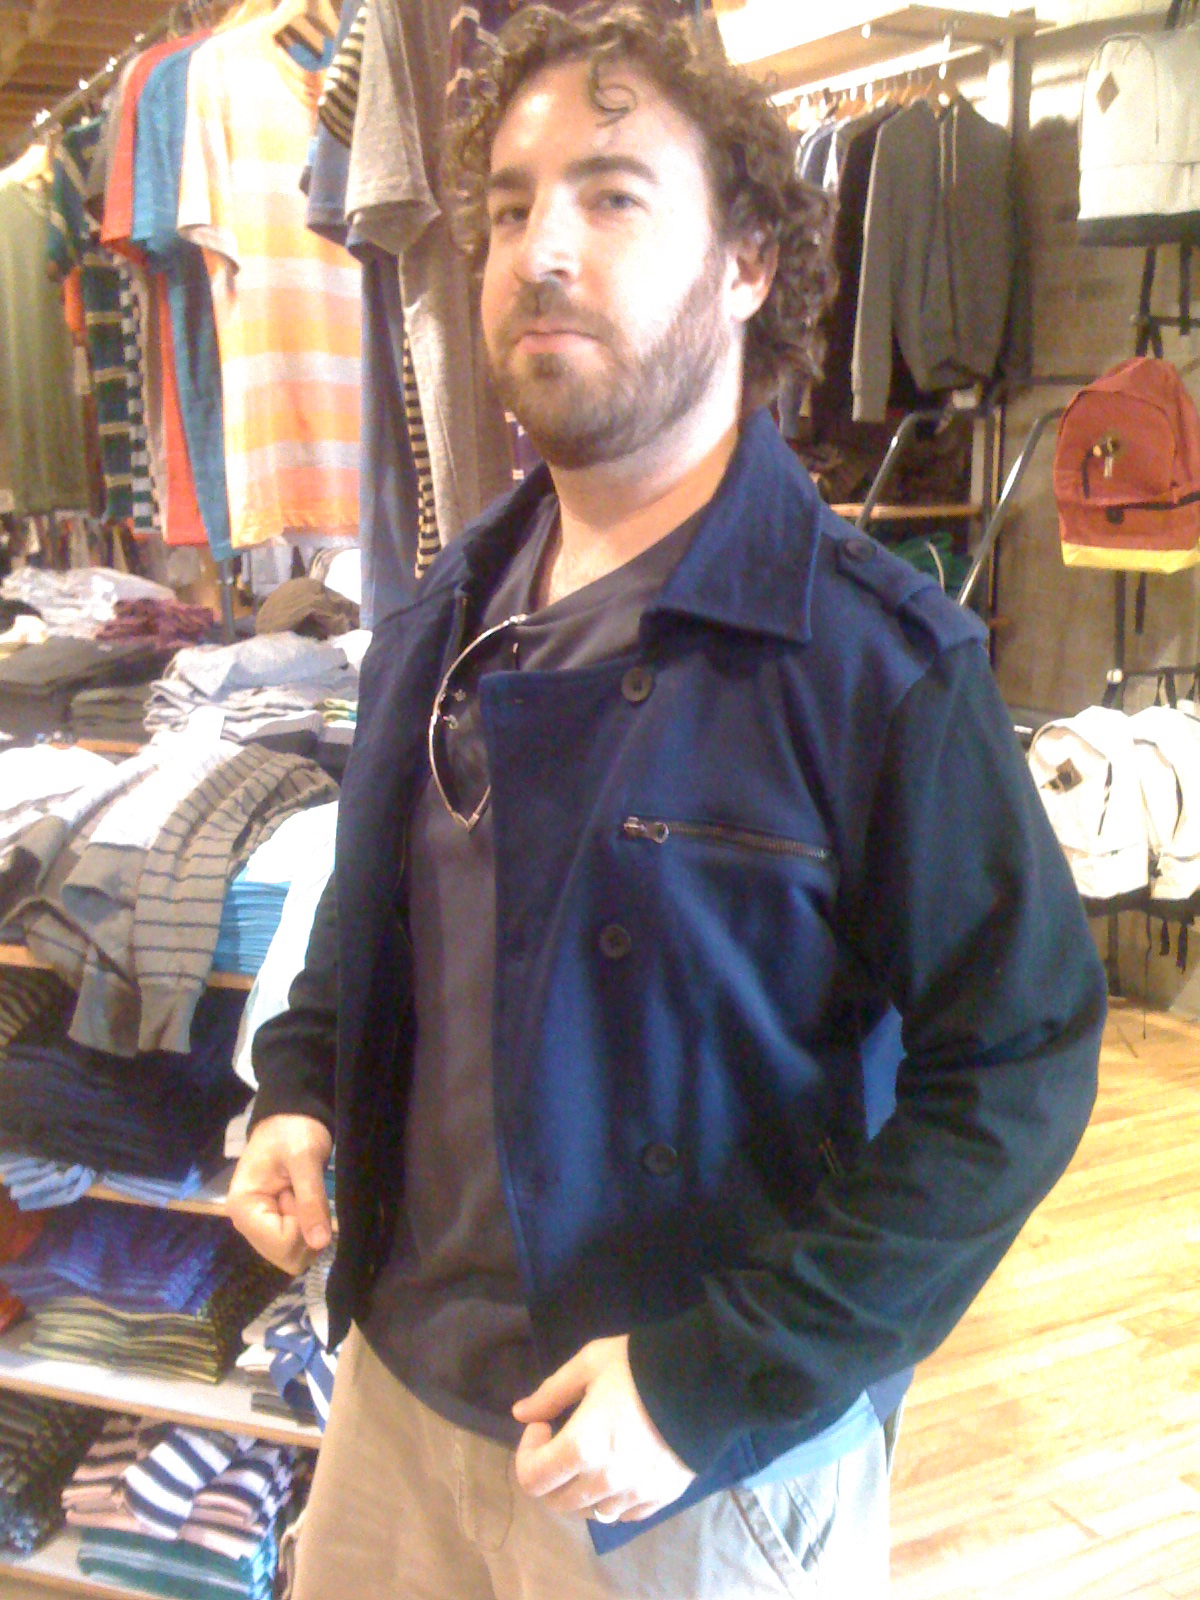 Southern Rock hair Andy and very fetching jacket.